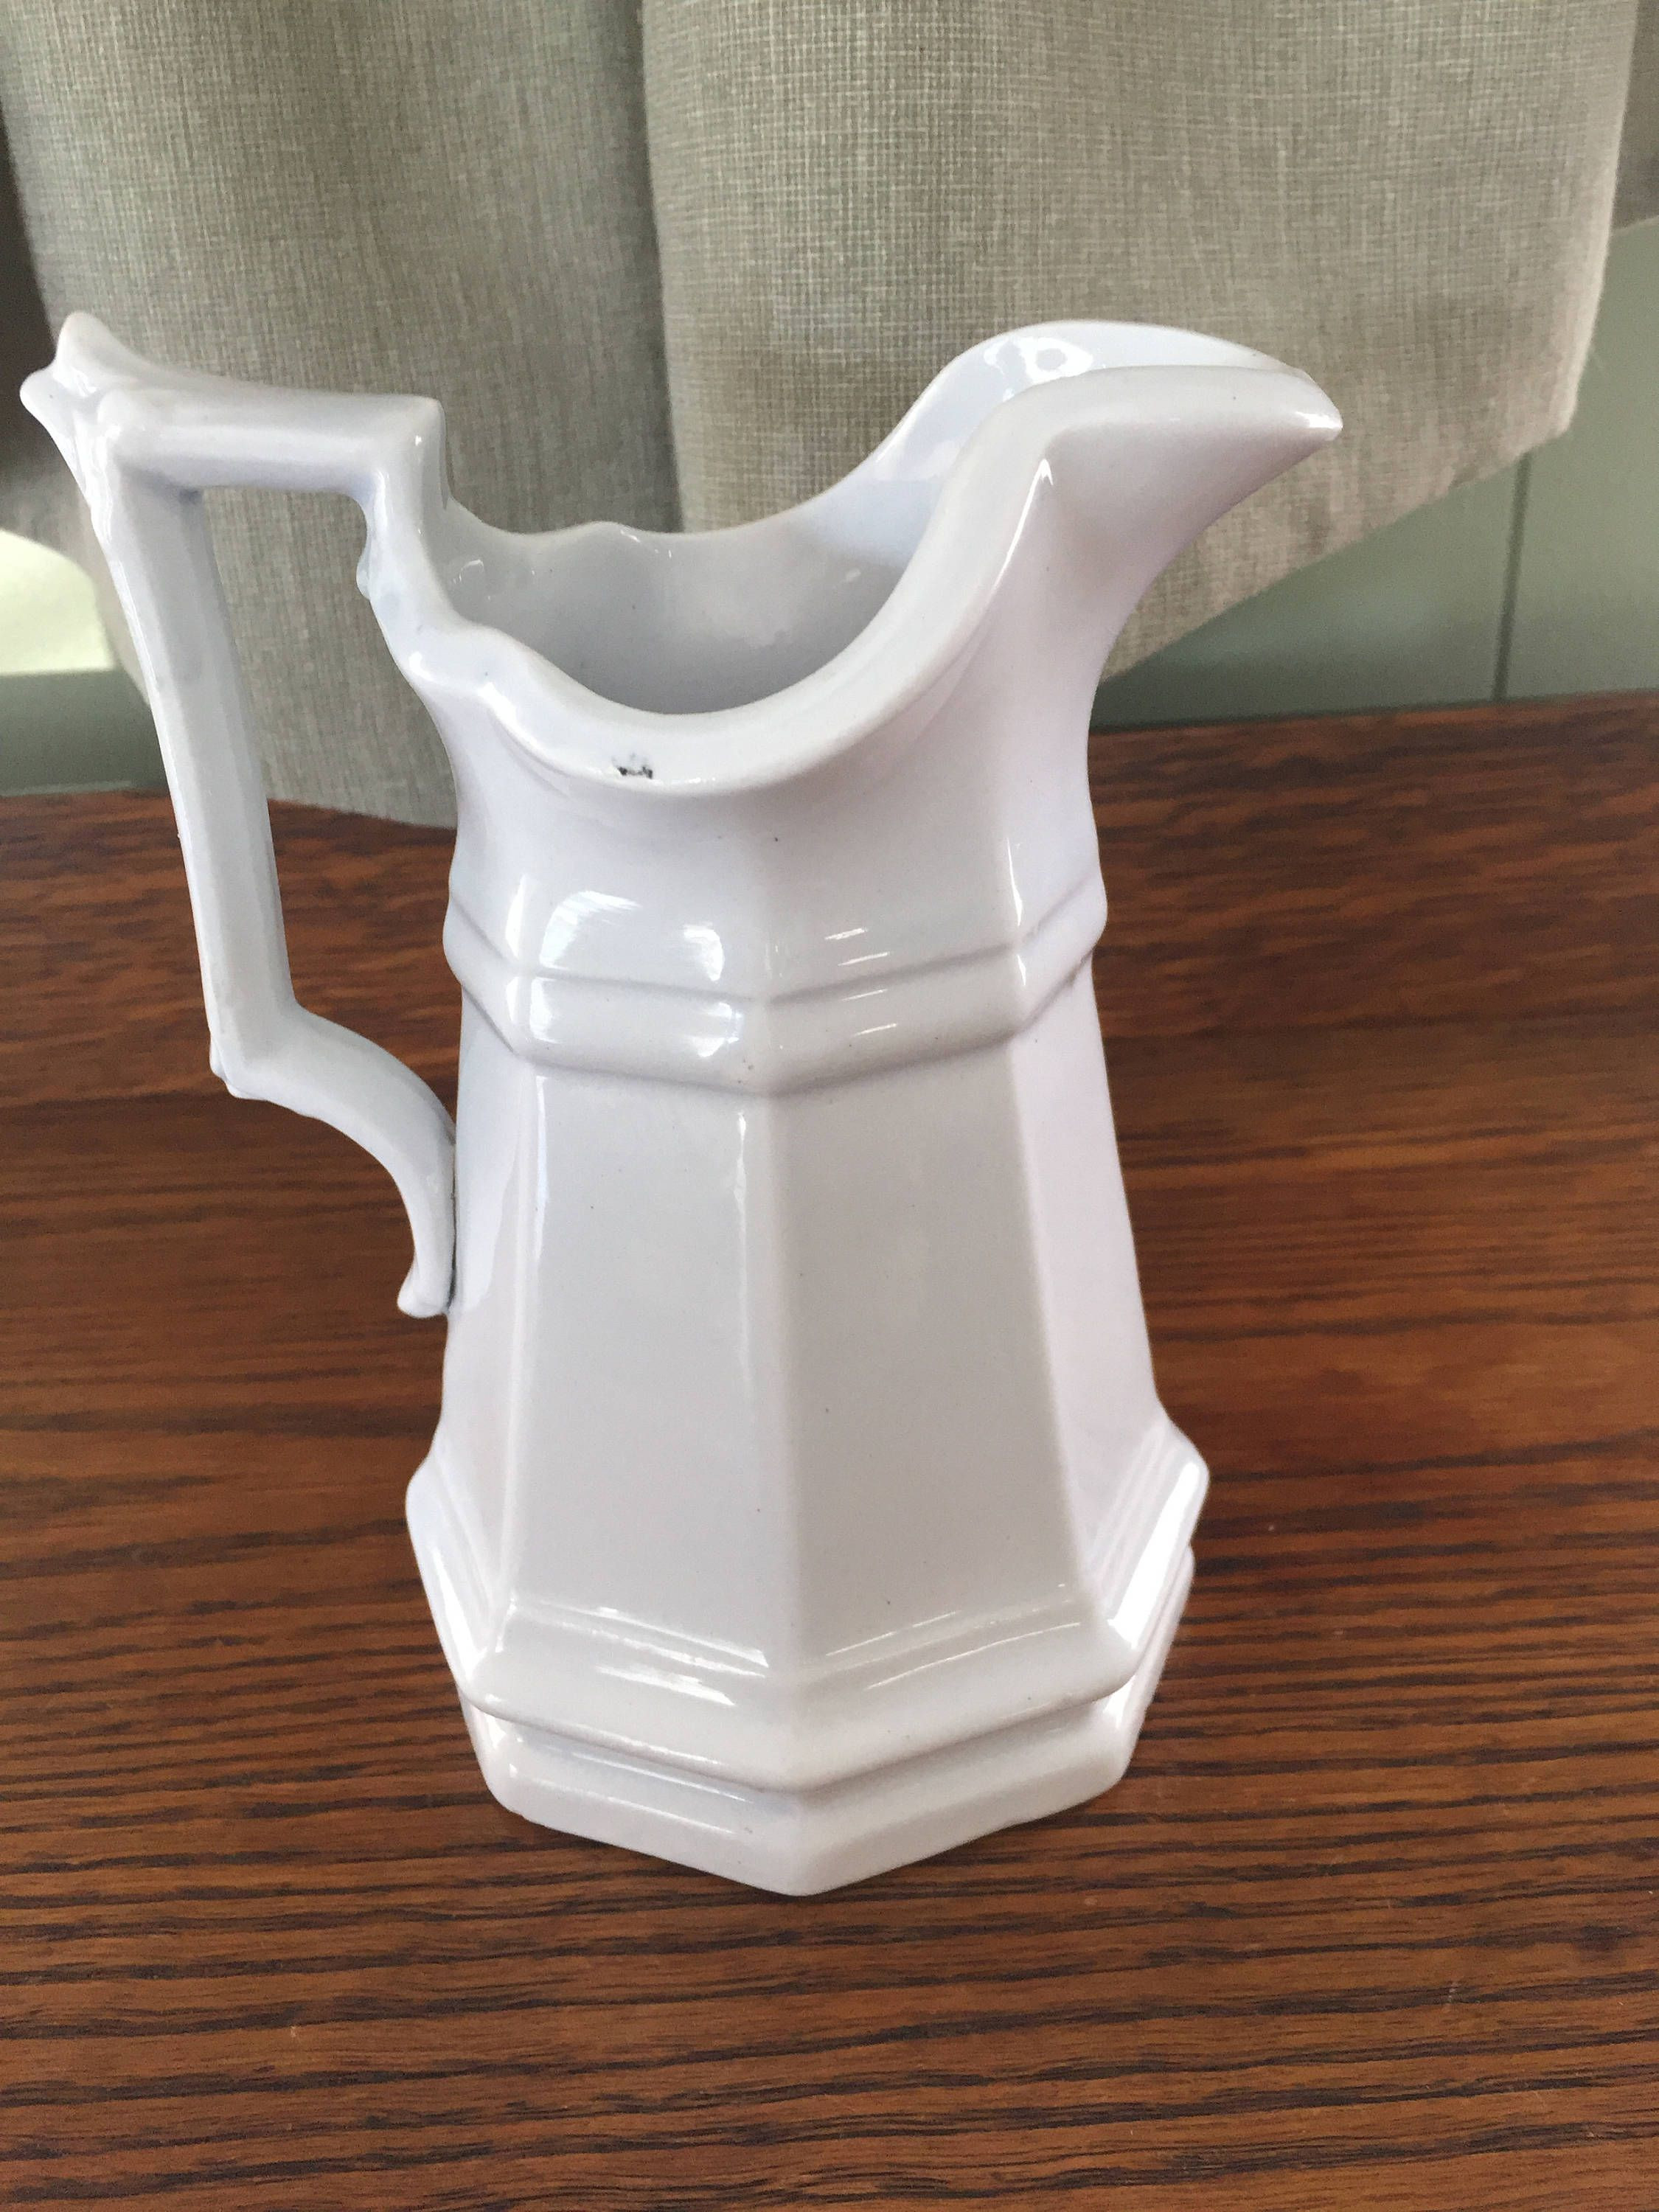 white pitcher vase with flowers of farmhouse pitcher vase elegant farmhouse pitcher vase best all inside farmhouse pitcher vase inspirational white pearl ironstone china pitcher j wedgwood farmhouse purely of farmhouse pitcher